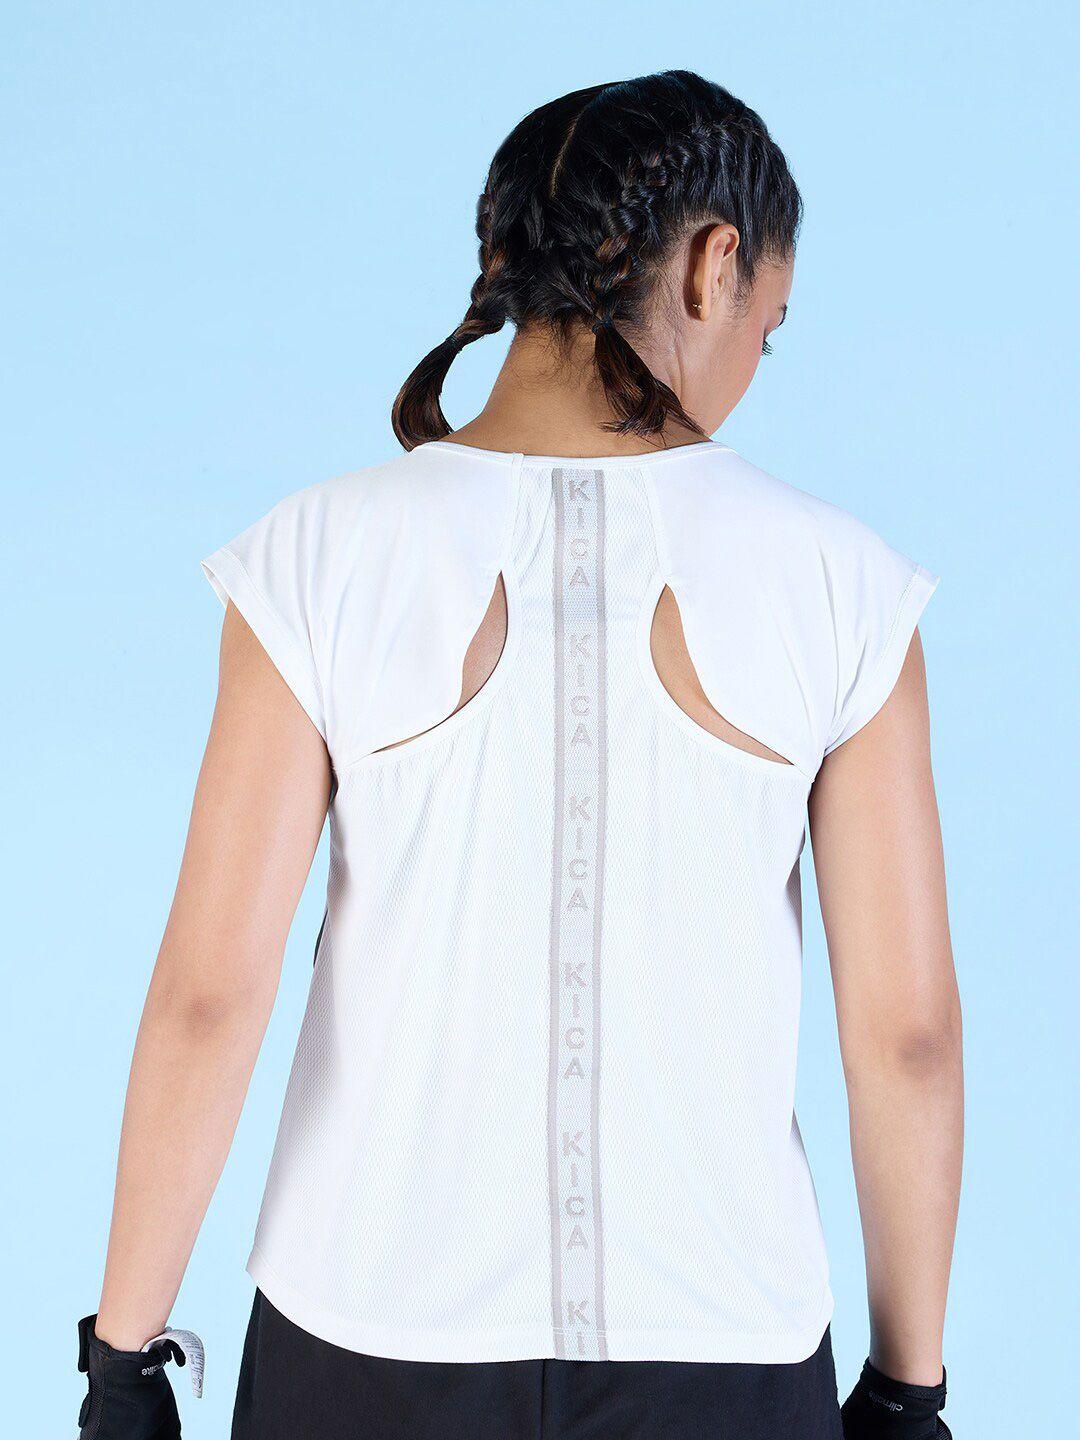 kica raglan sleeves cut outs styled back sports top